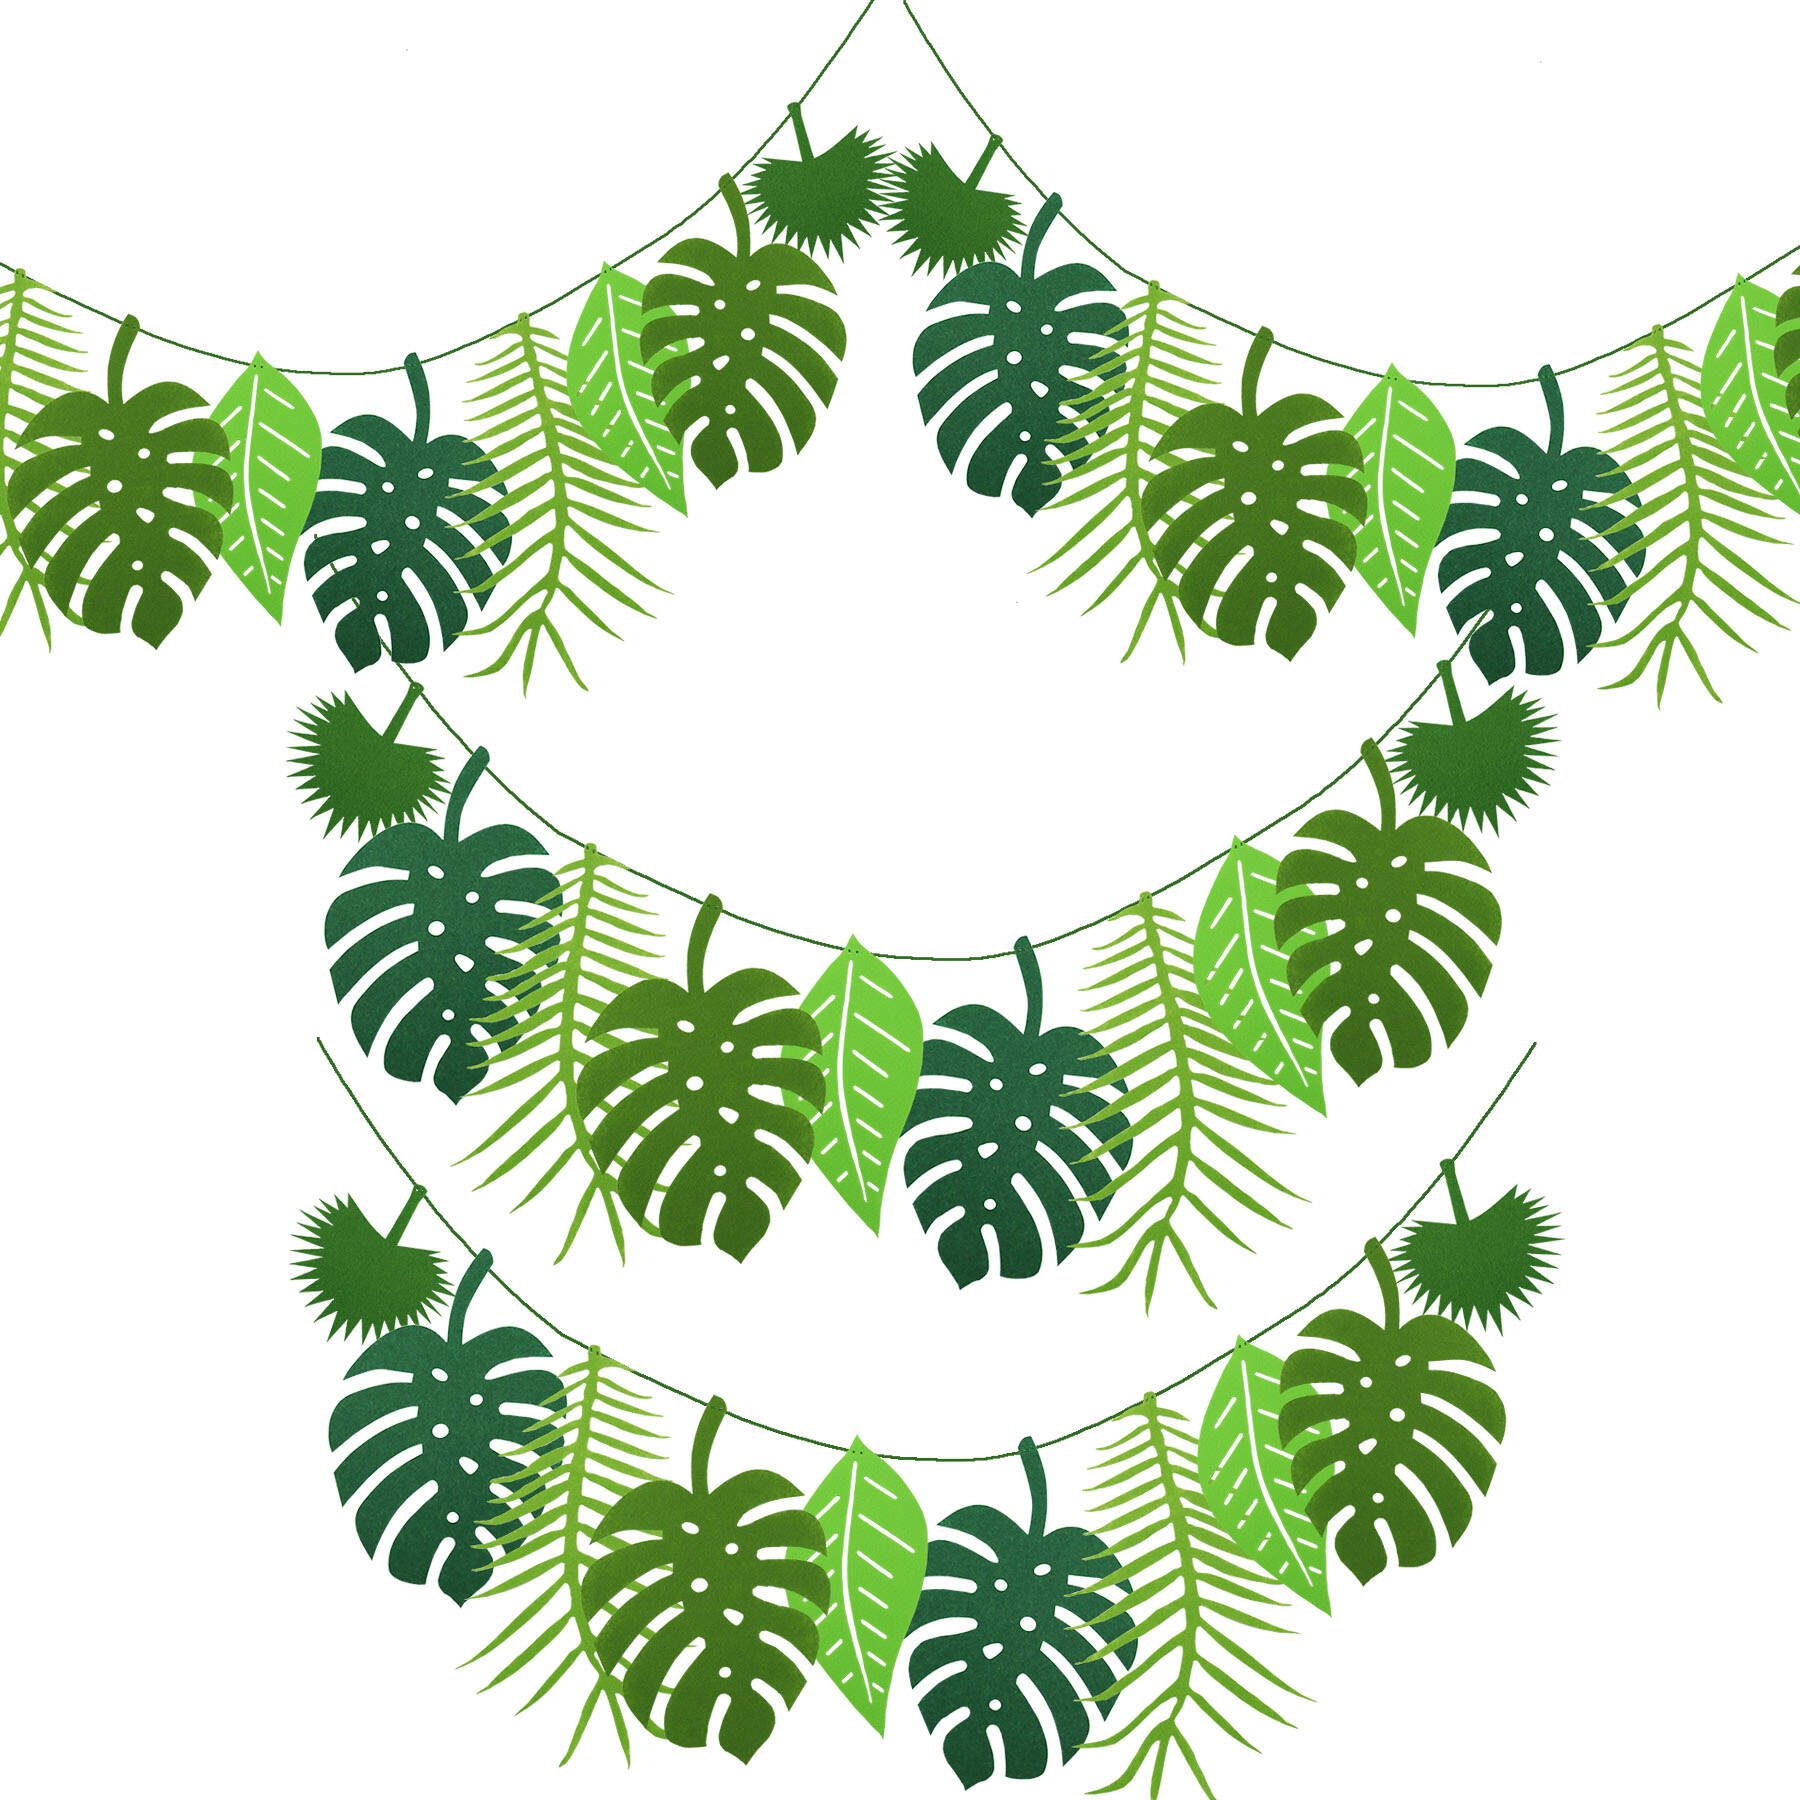 4 Pack Tropical Leaf Banner Hawaii Luau Party Leaves Garland Summer Beach Theme Wedding Birthday Party Decor - image 1 of 7